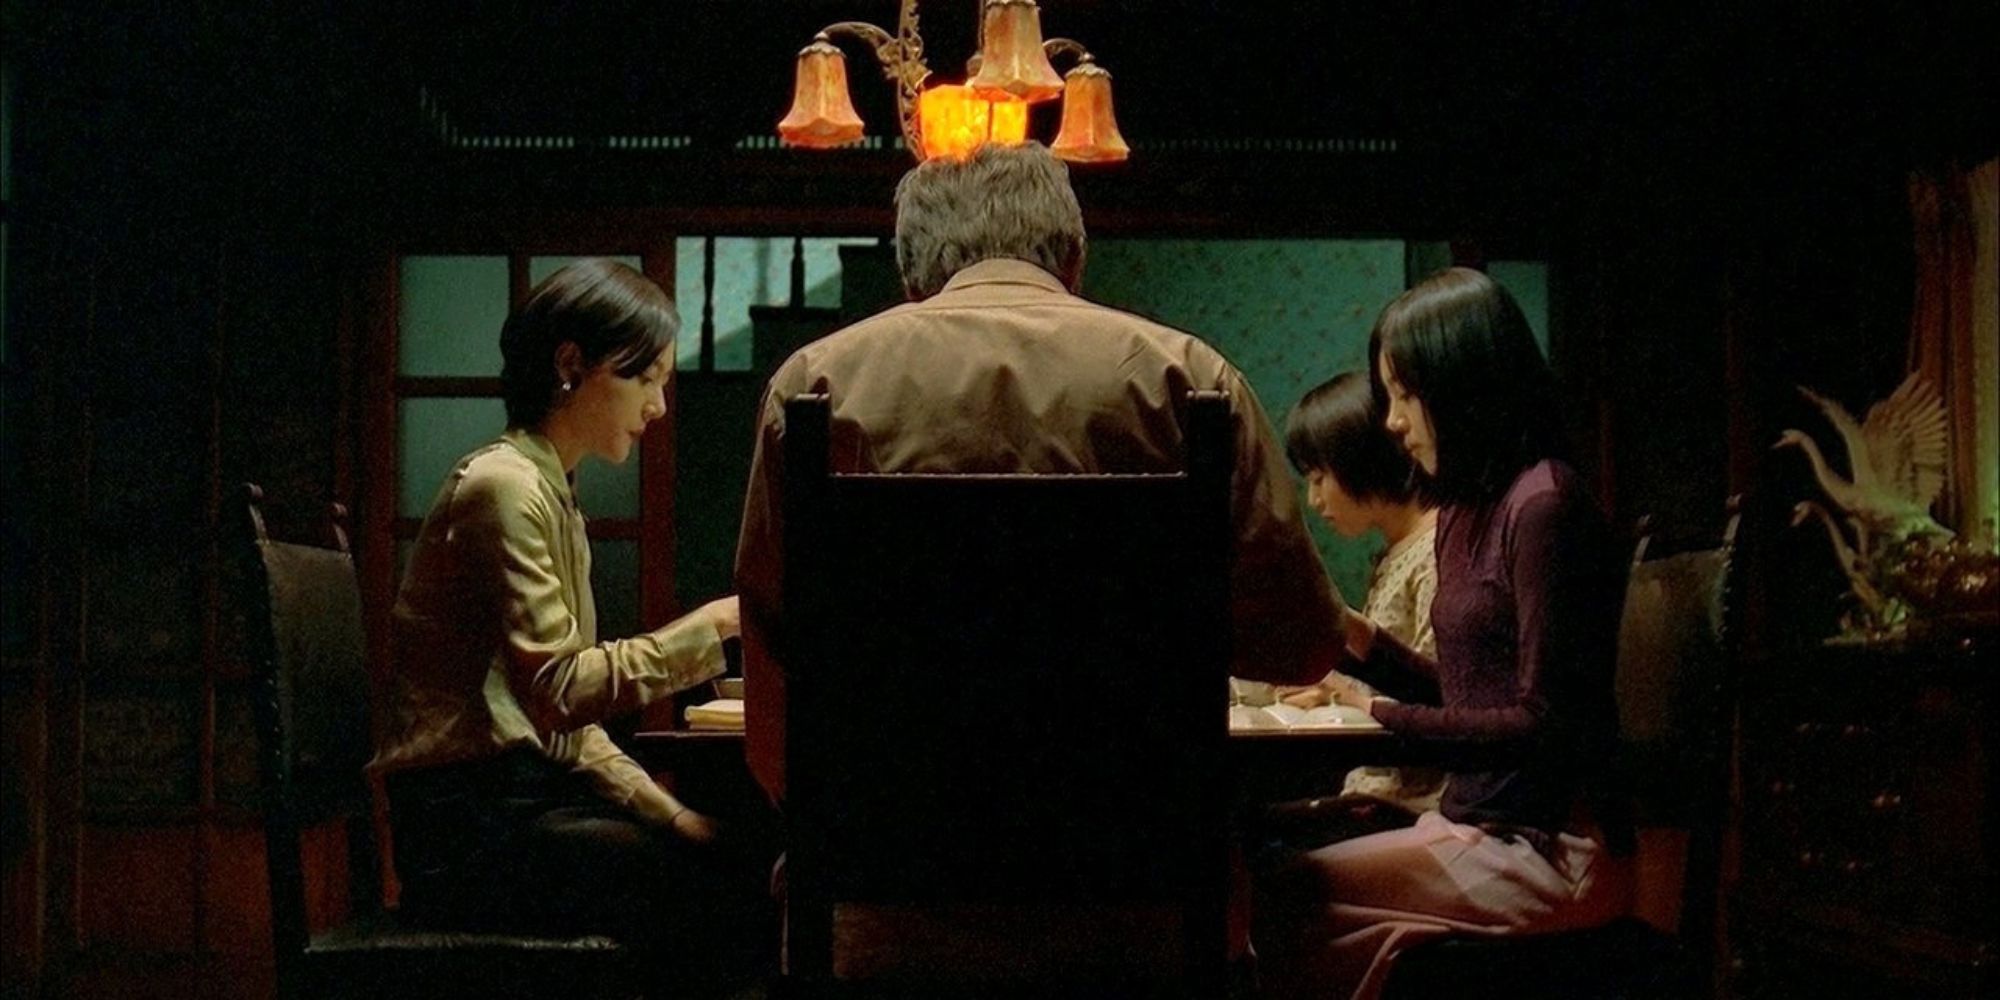 The Bae family having dinner in A Tale of Two Sisters (2003)